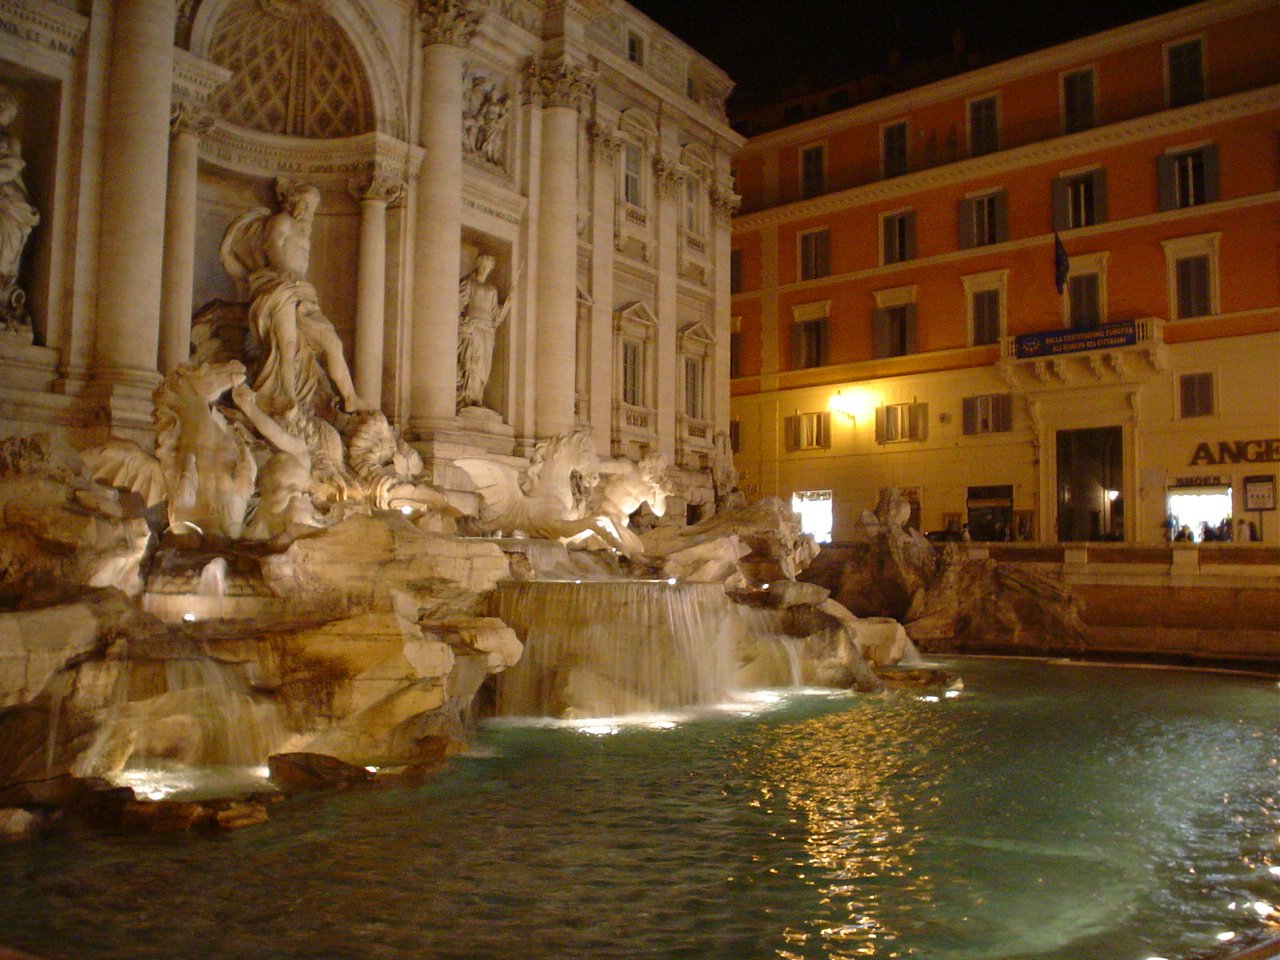 there are many statues surrounding the fountain in the night